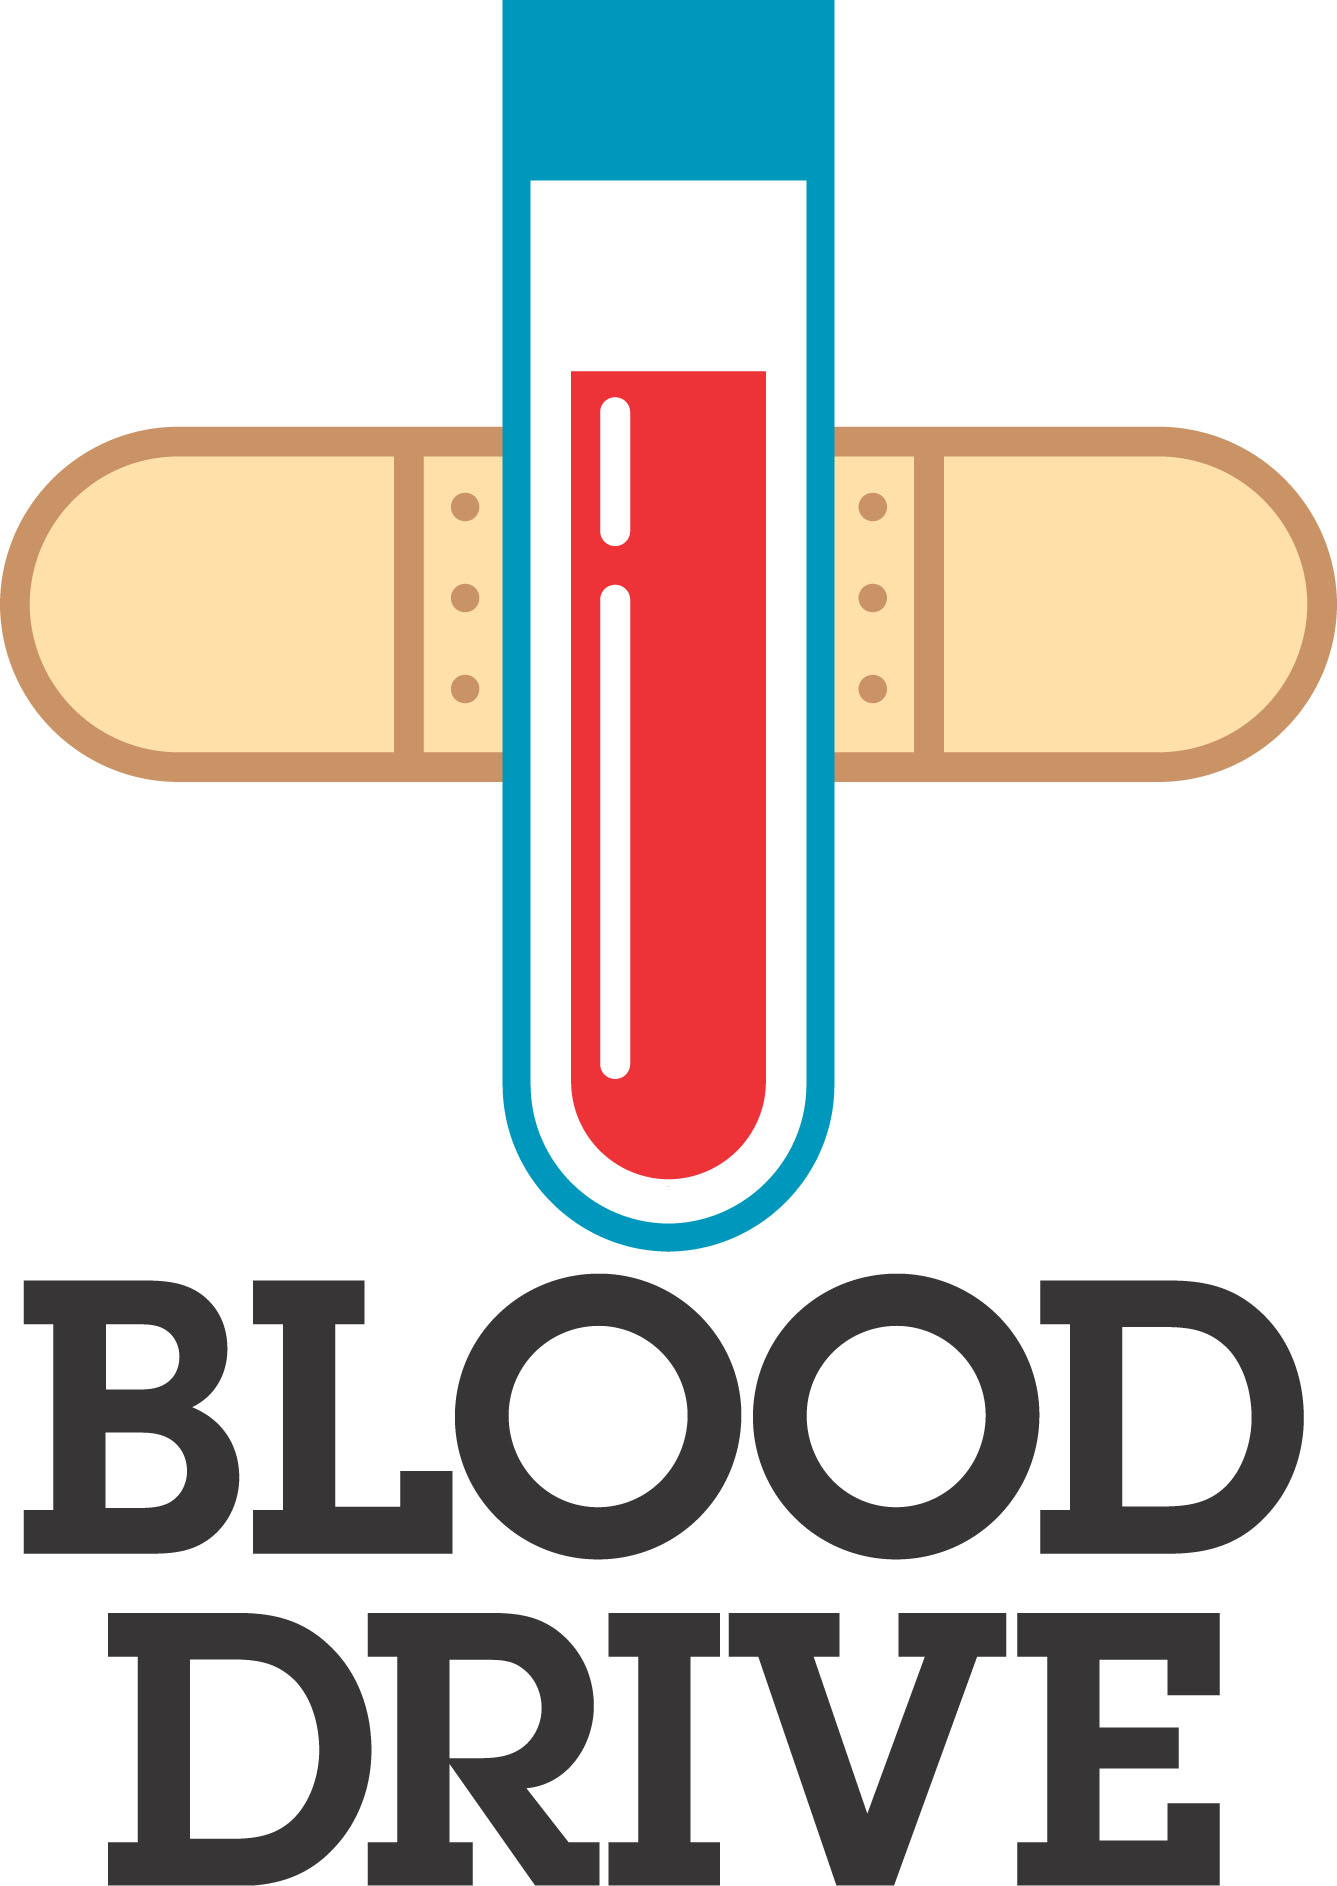 Blood Drive | Democratic Party of Washington County Wisconsin